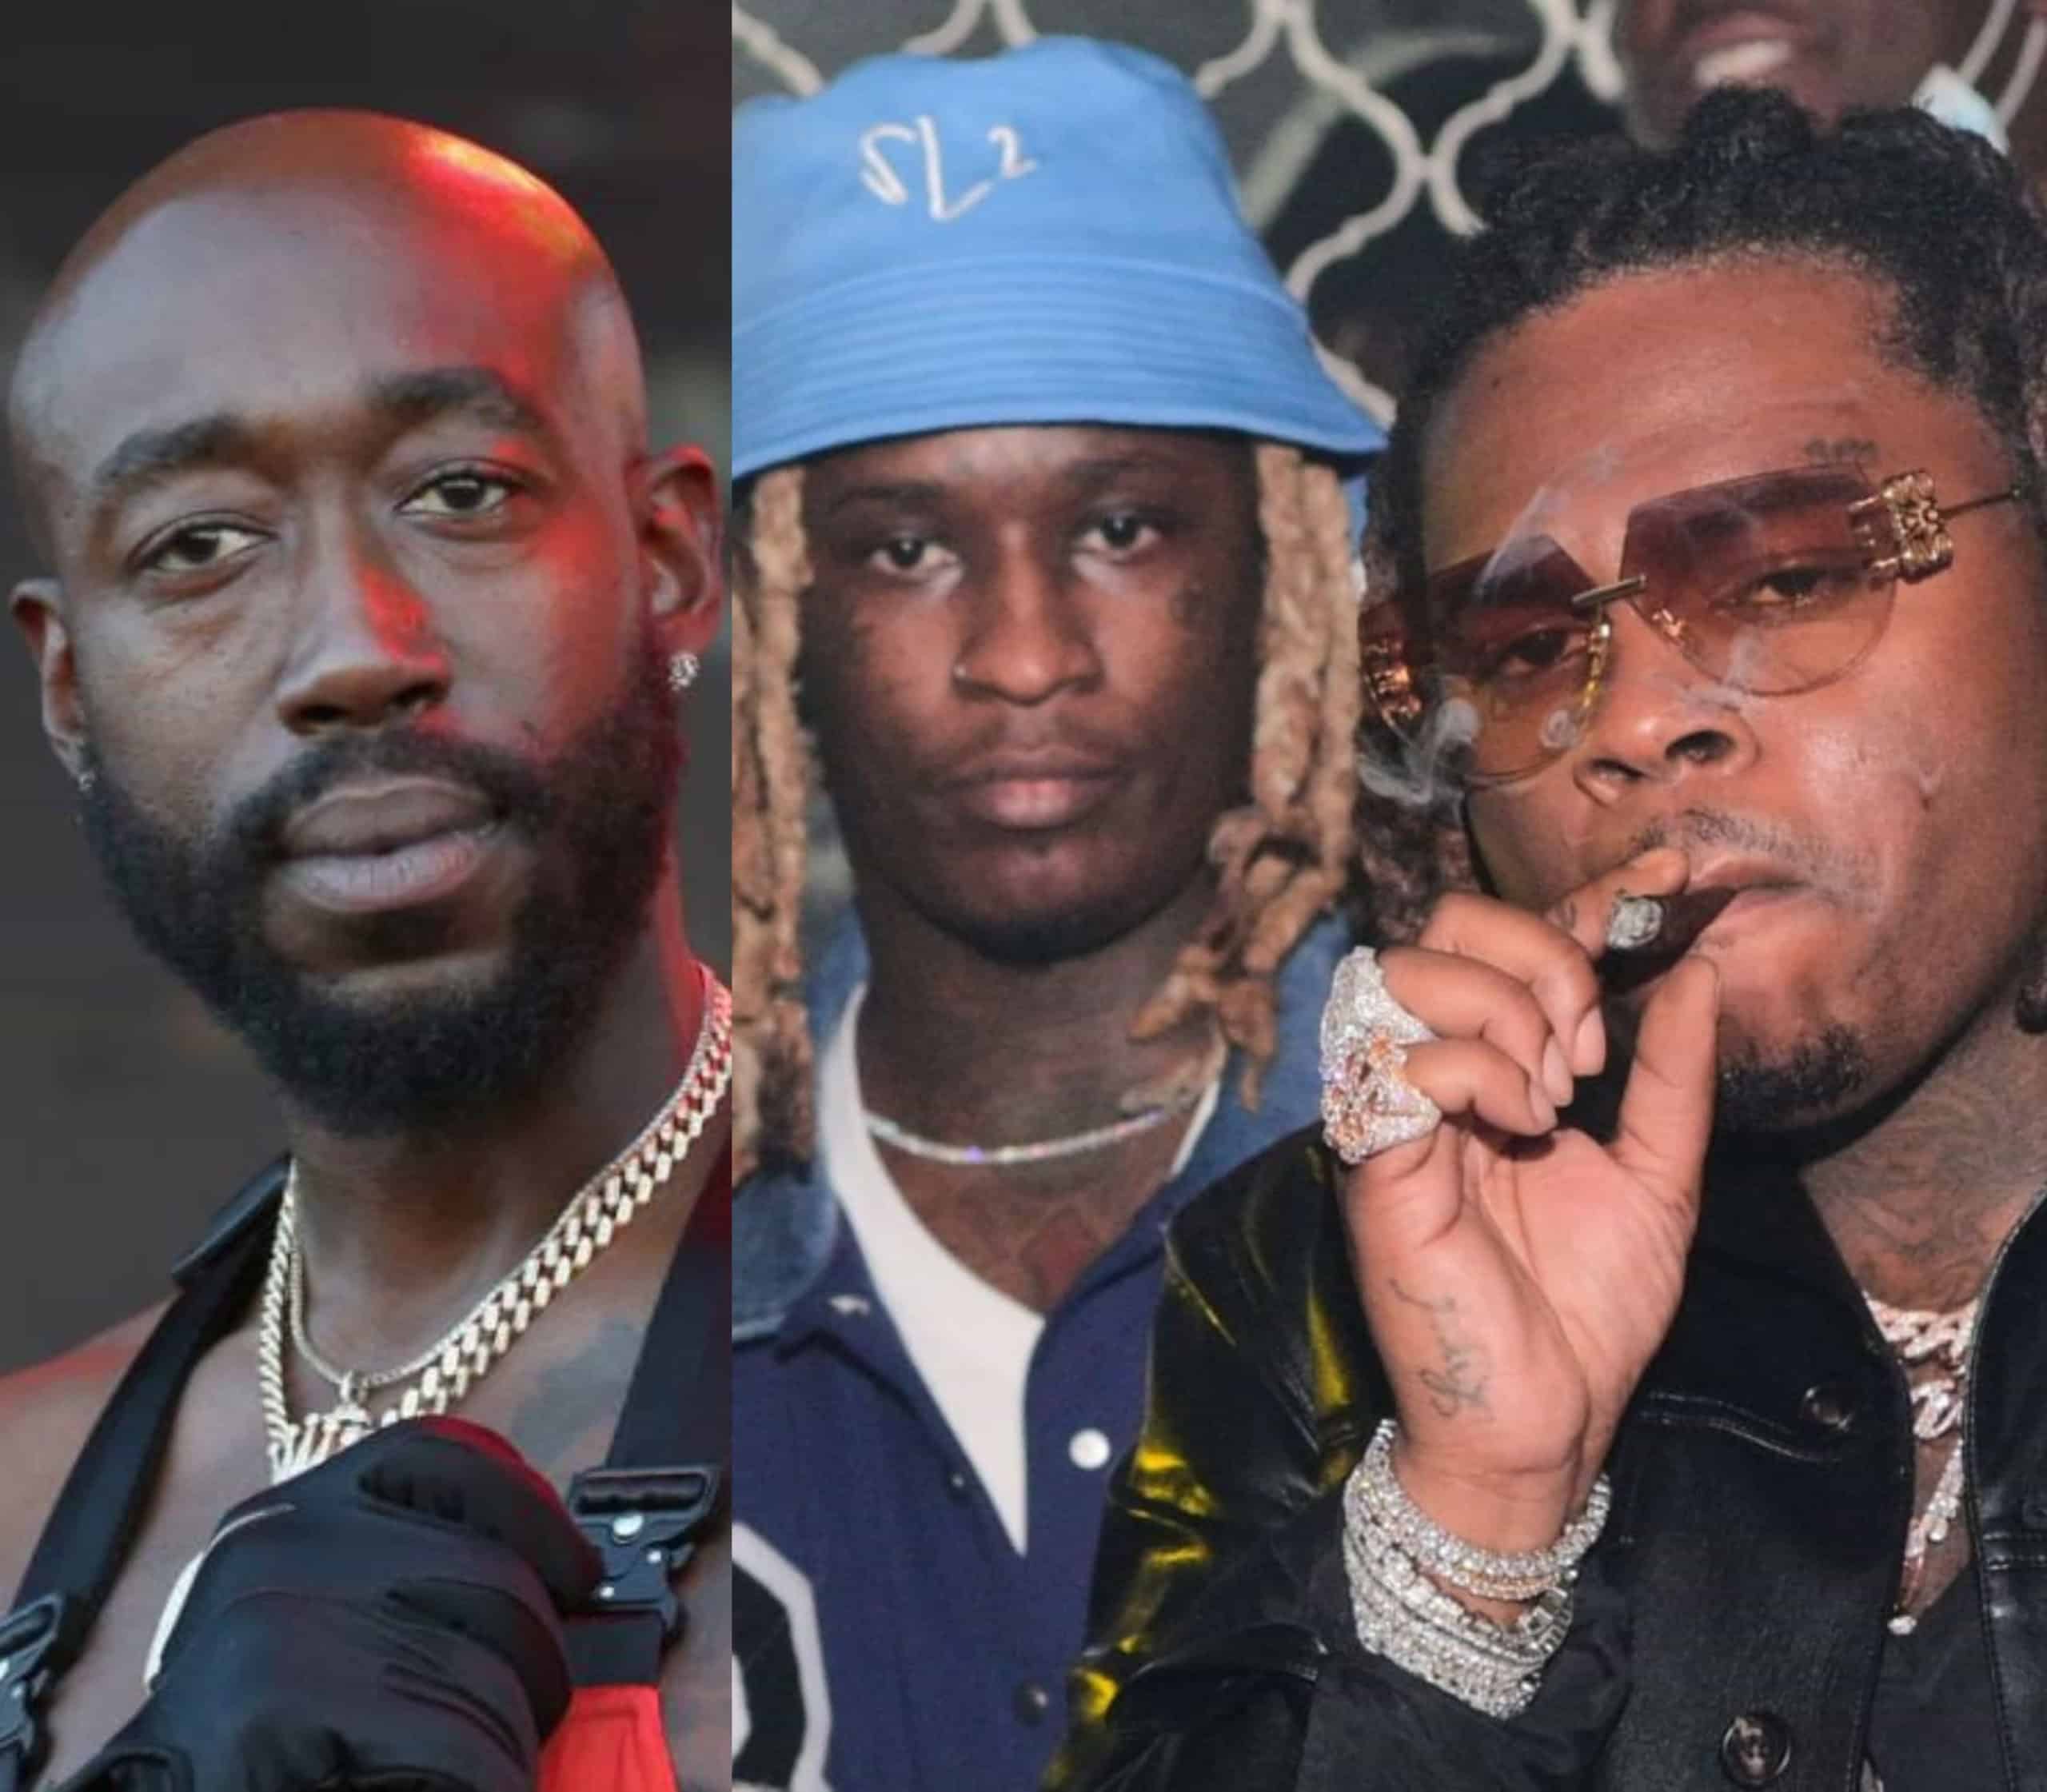 Freddie Gibbs Responds After Young Thug Co-Signs Diss Track From Gunna